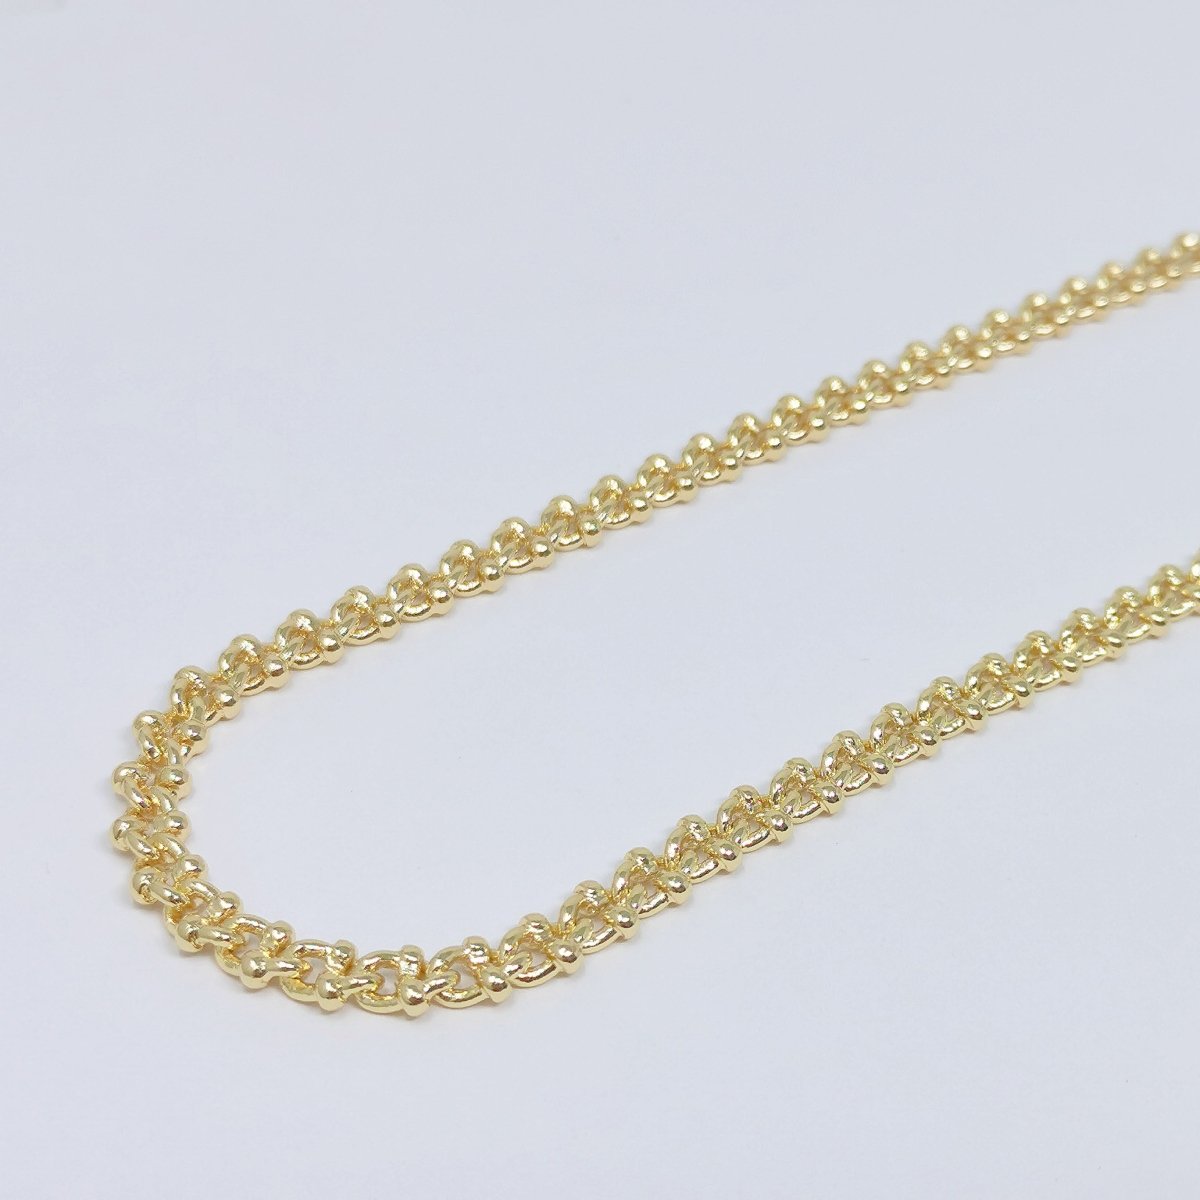 Vintage City Hardware, 24K Gold Filled, Chain by Yard, Oval Double Dot Link Chain, Bold bulk Roll Chain, Size 8x5.5mm, Wholesale Necklace Making | ROLL-400 Clearance Pricing - DLUXCA